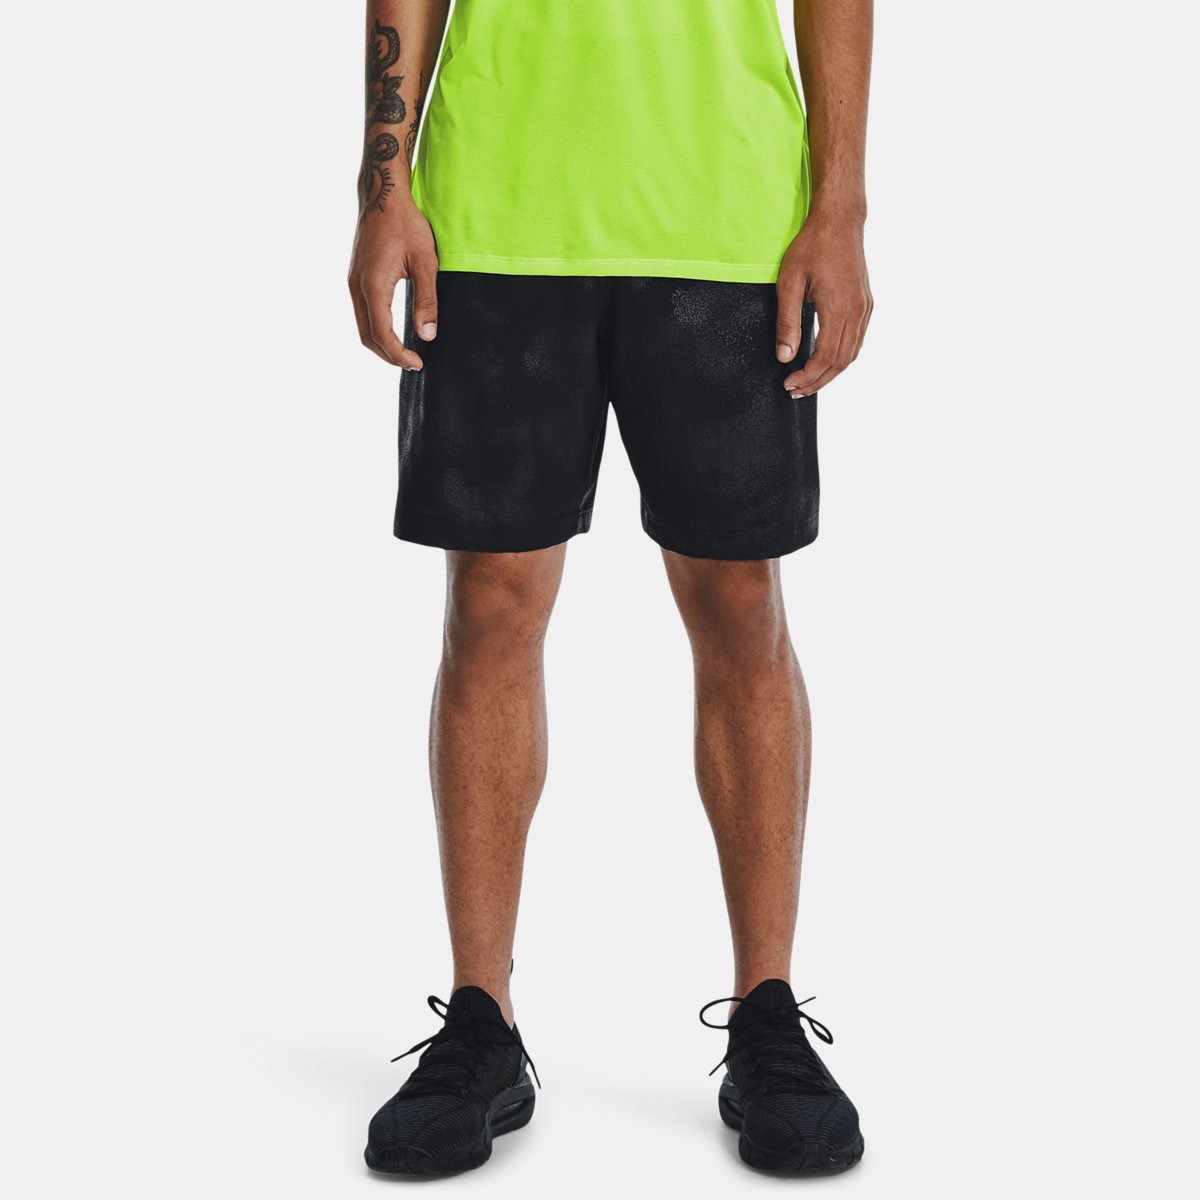 Shorts Black for Men from Under Armour GOOFASH